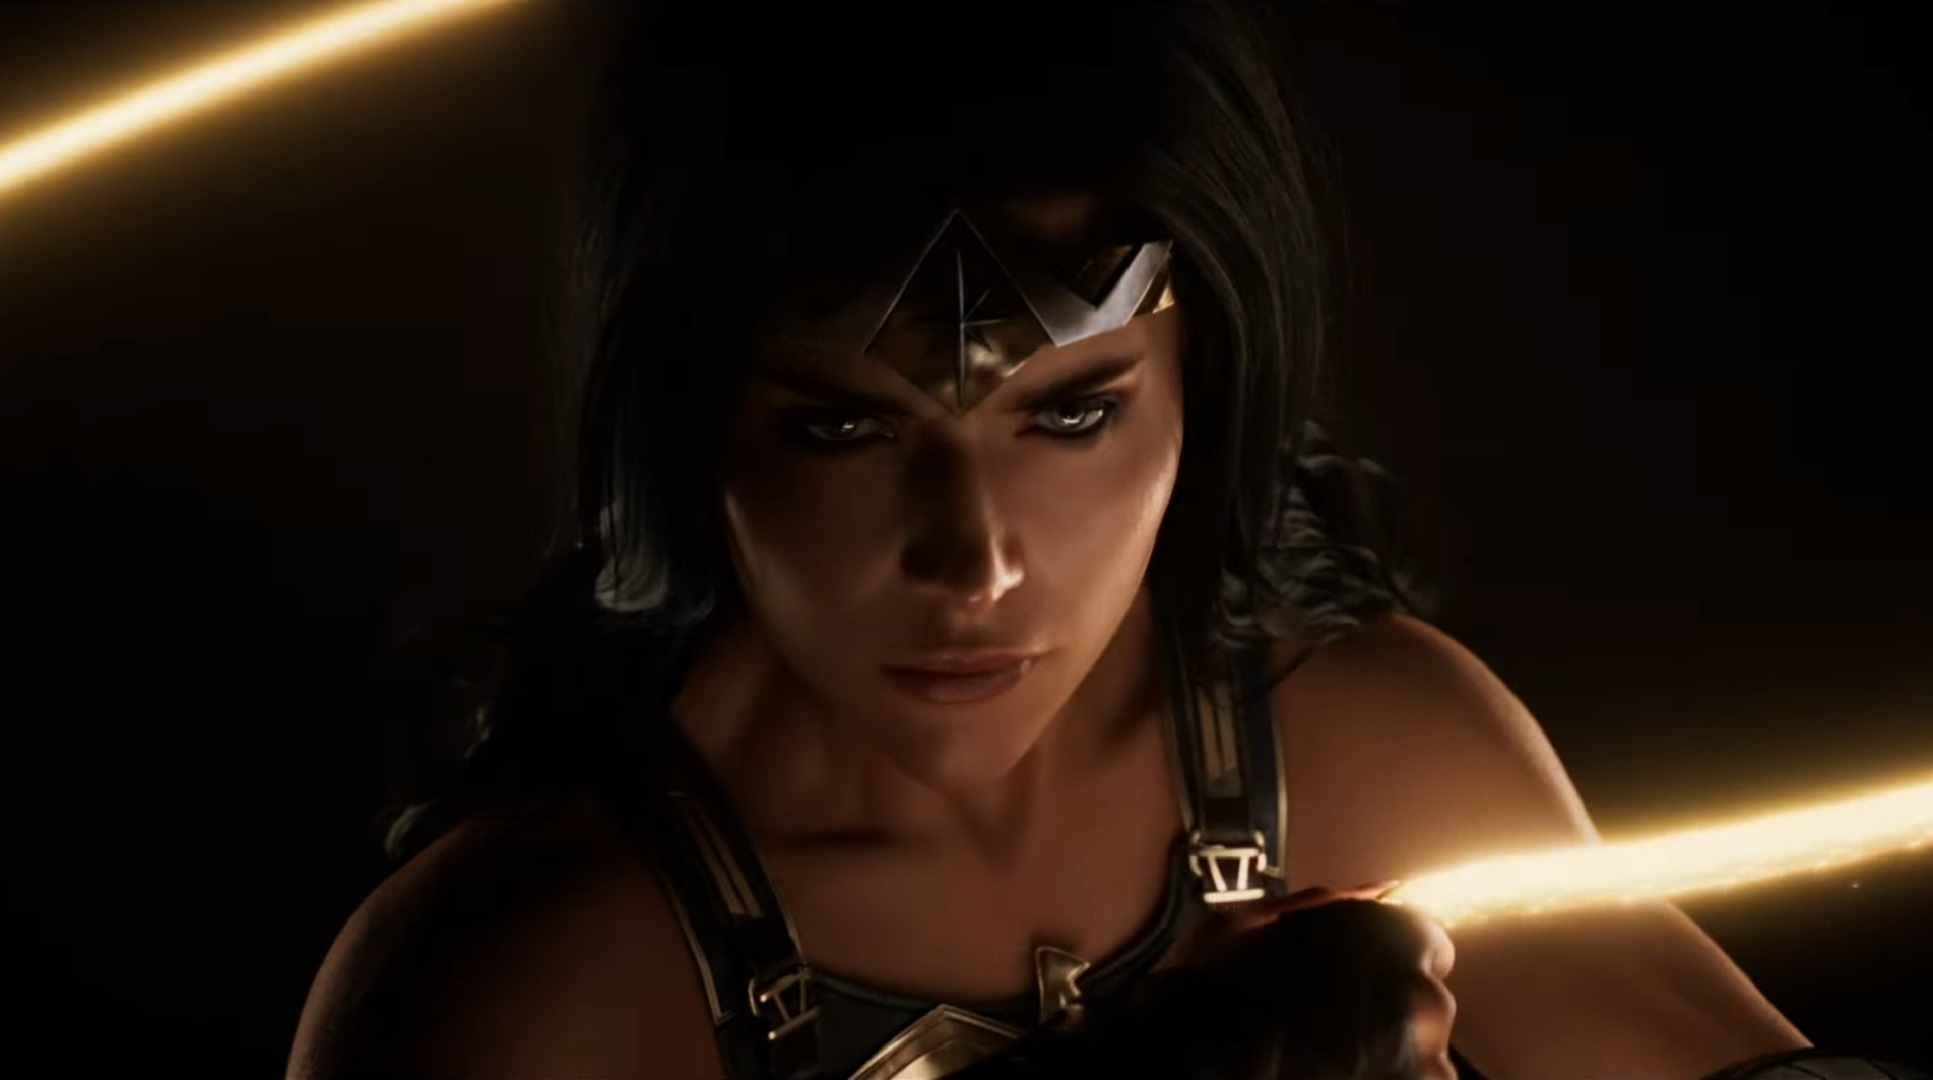 Everything we know about the upcoming Wonder Woman game